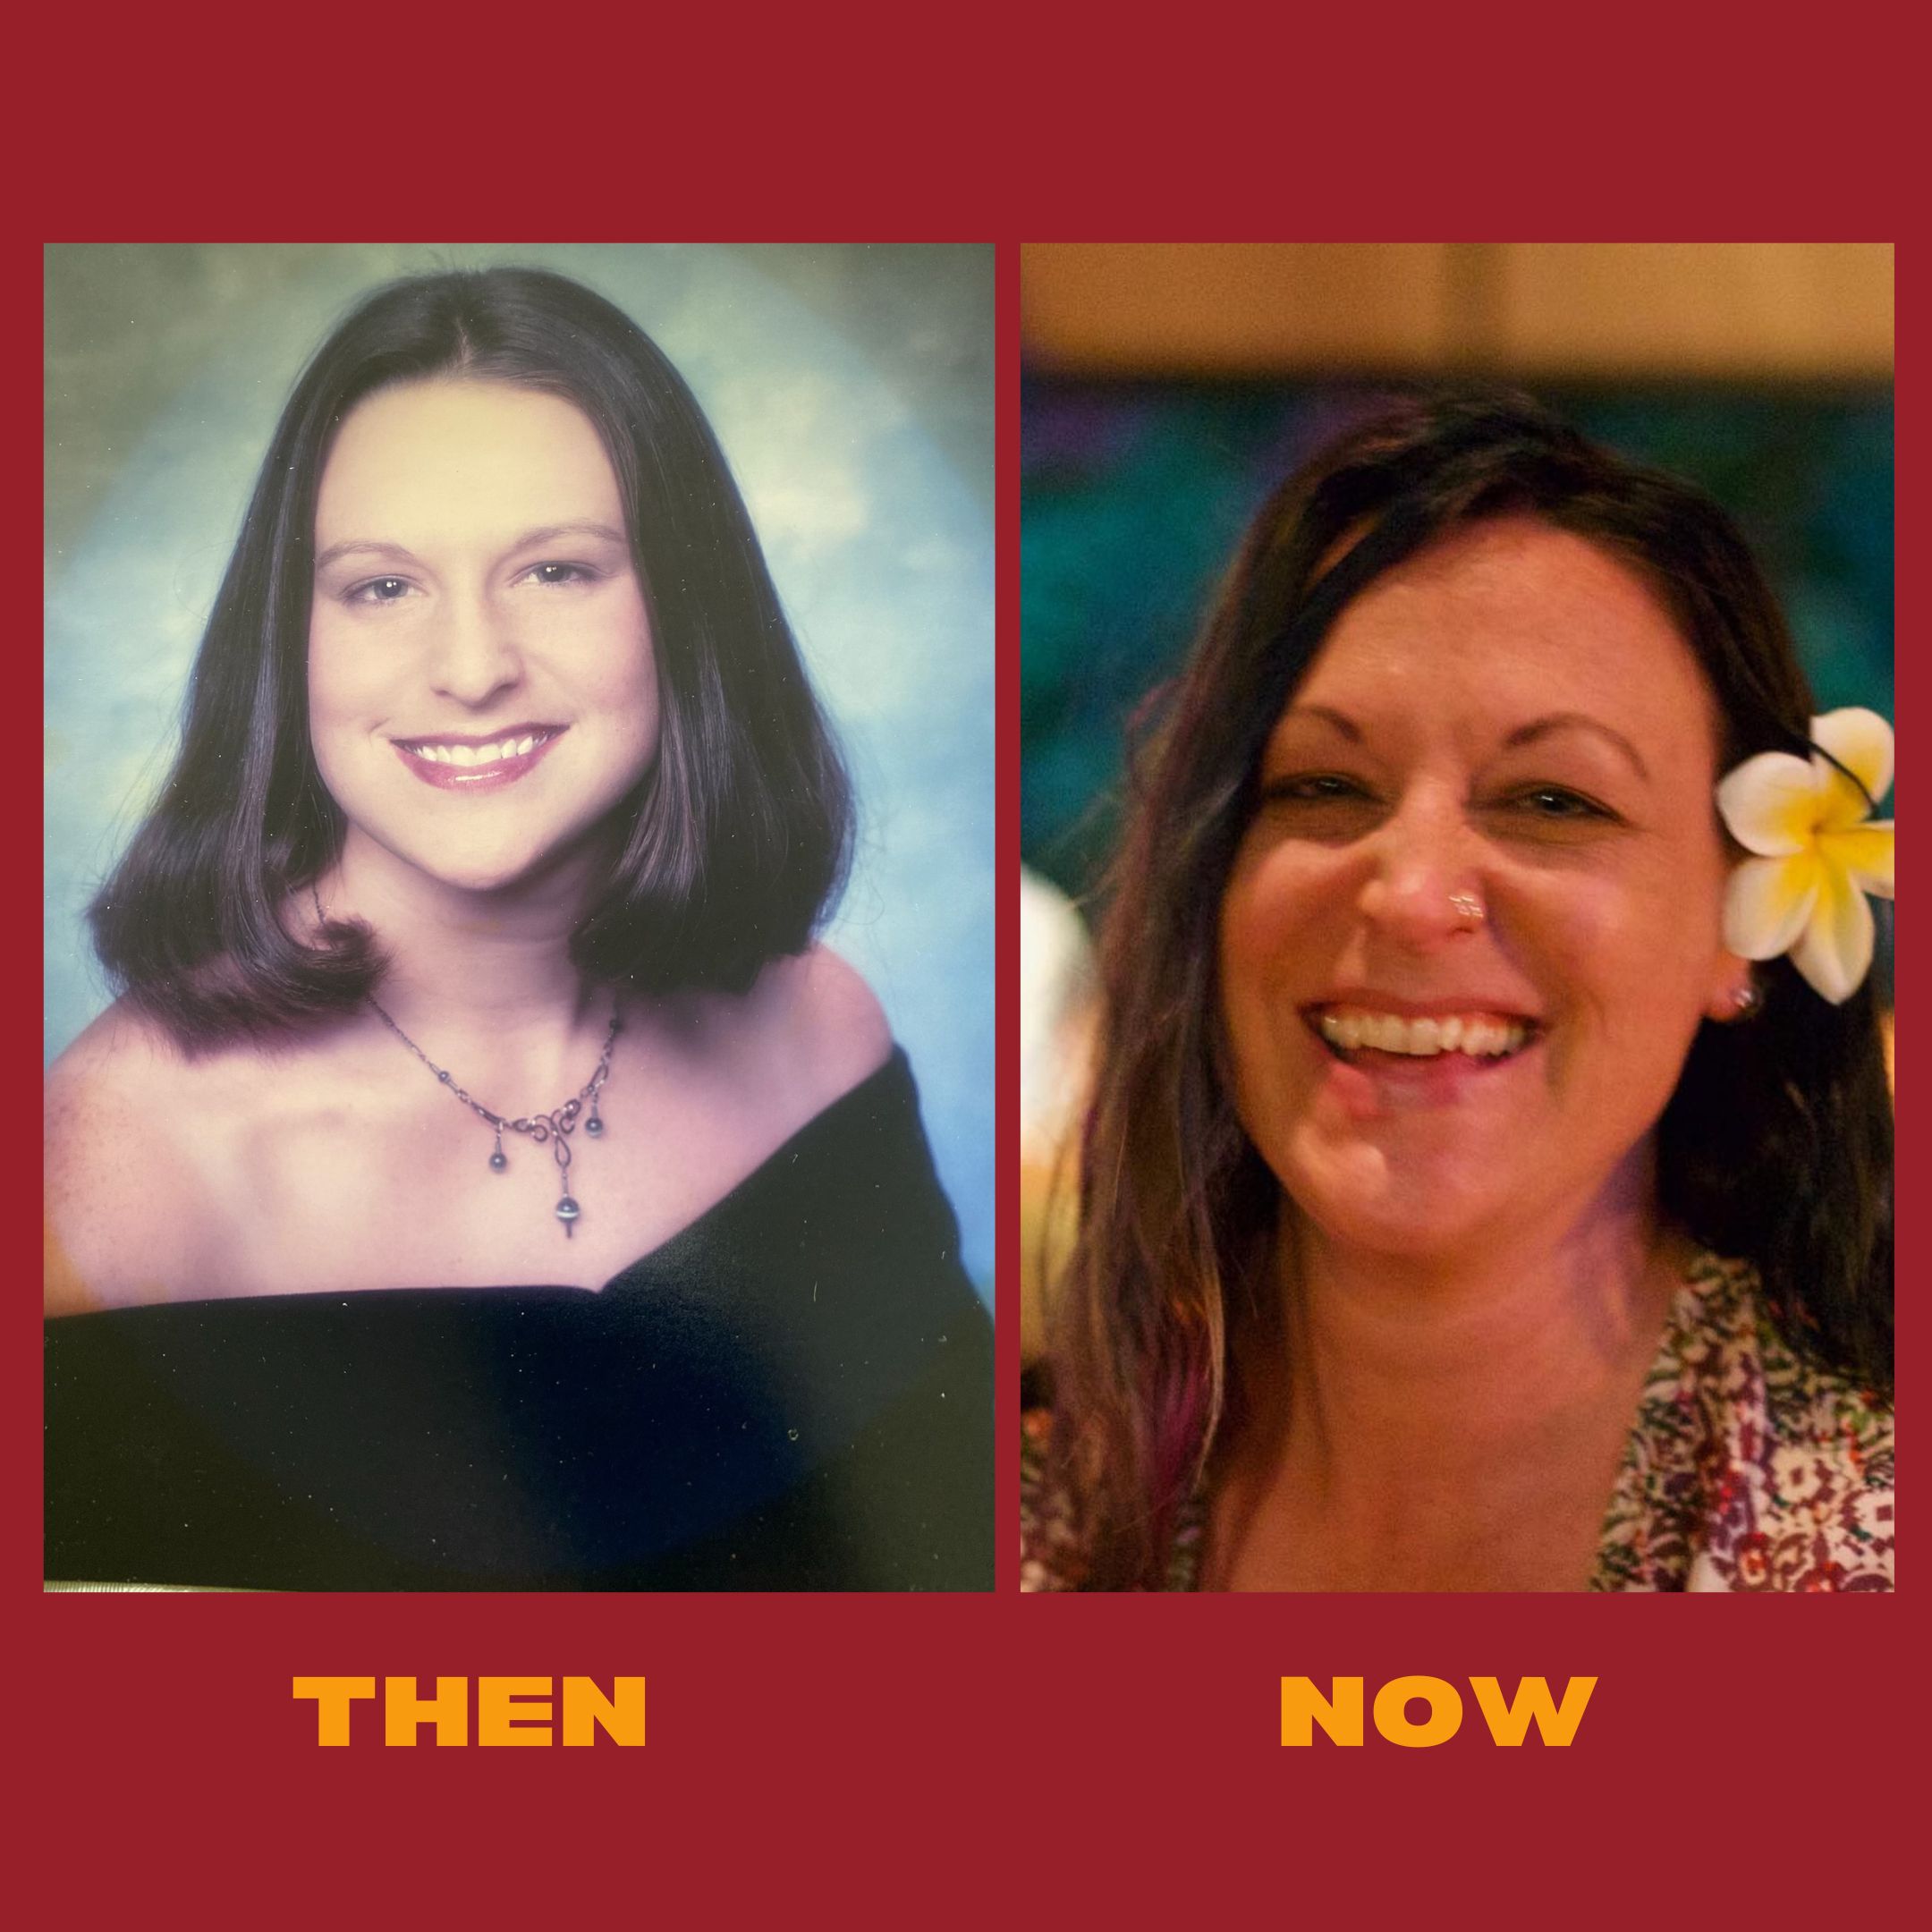 The School for Entrepreneurship and Technology (SET High) site manager, Carrie Heath, shares high school yearbook photo and current photo with a plumeria flower tucked behind her ear. 